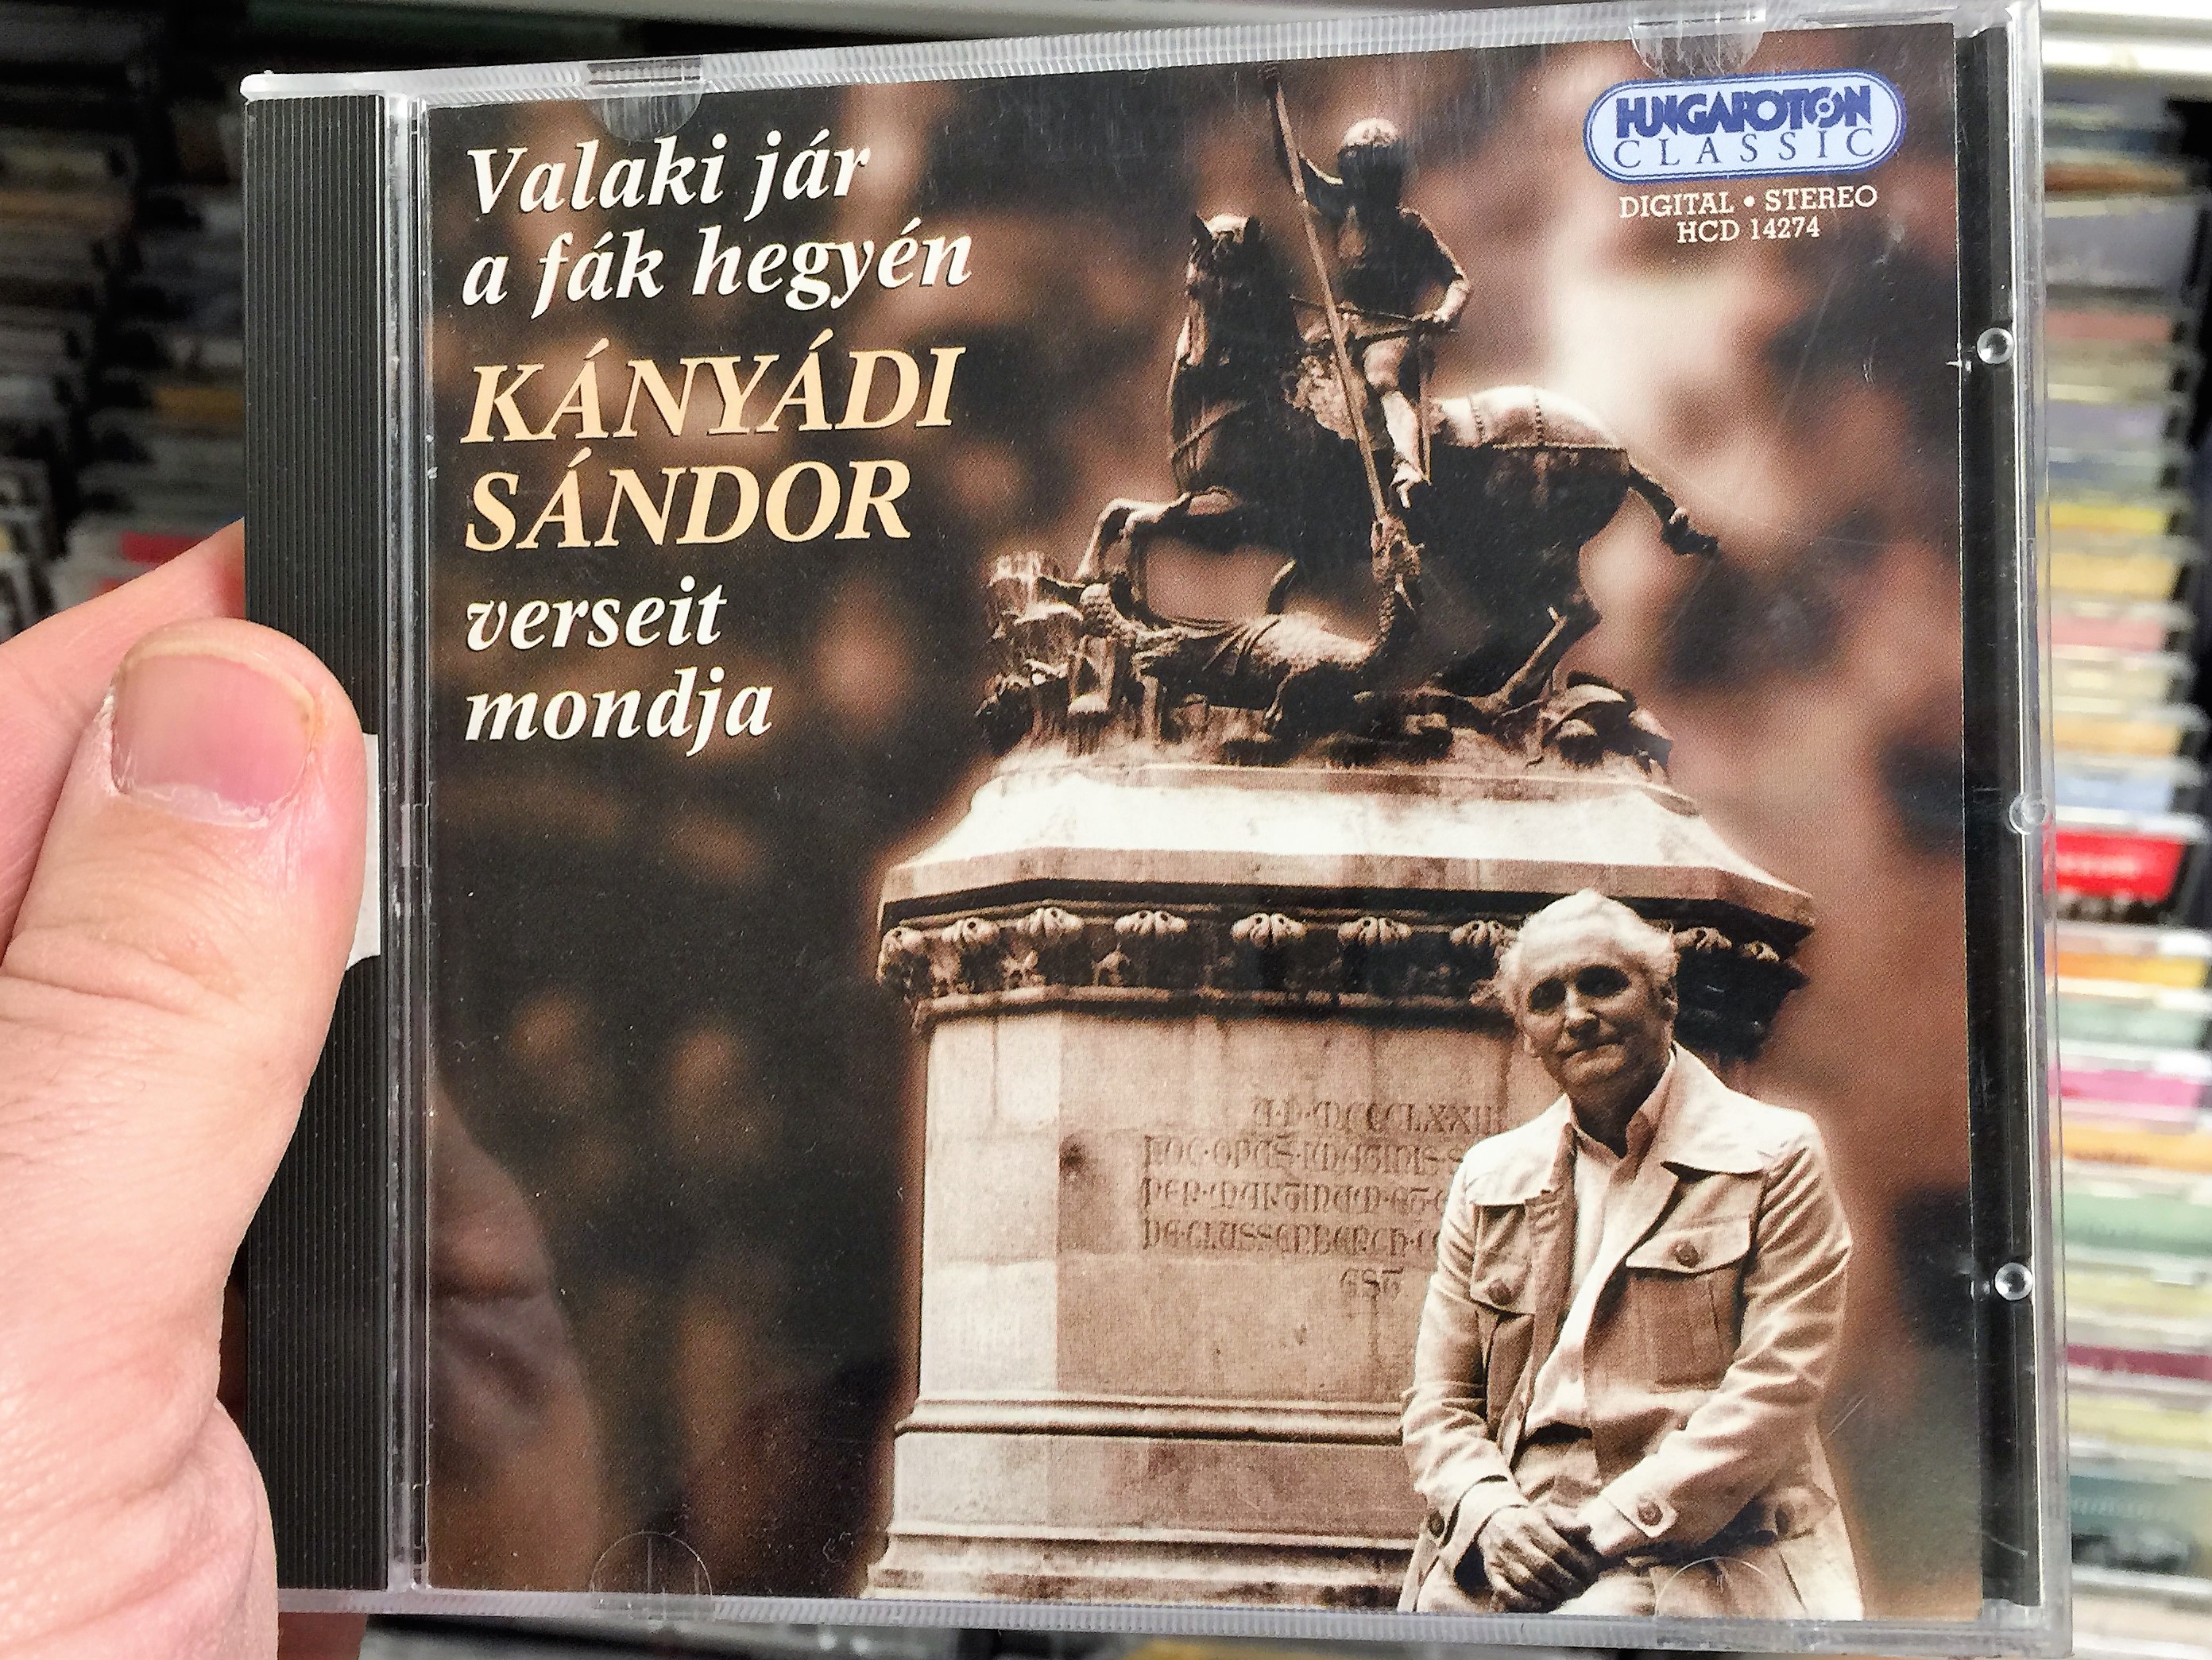 valaki-j-r-a-f-k-hegy-n-k-ny-di-s-ndor-verseit-mondja-hungarian-cd-1999-somebody-on-the-mount-of-trees-poet-s-ndor-k-ny-di-recites-his-poems-hungaroton-hcd-14274-1-.jpg